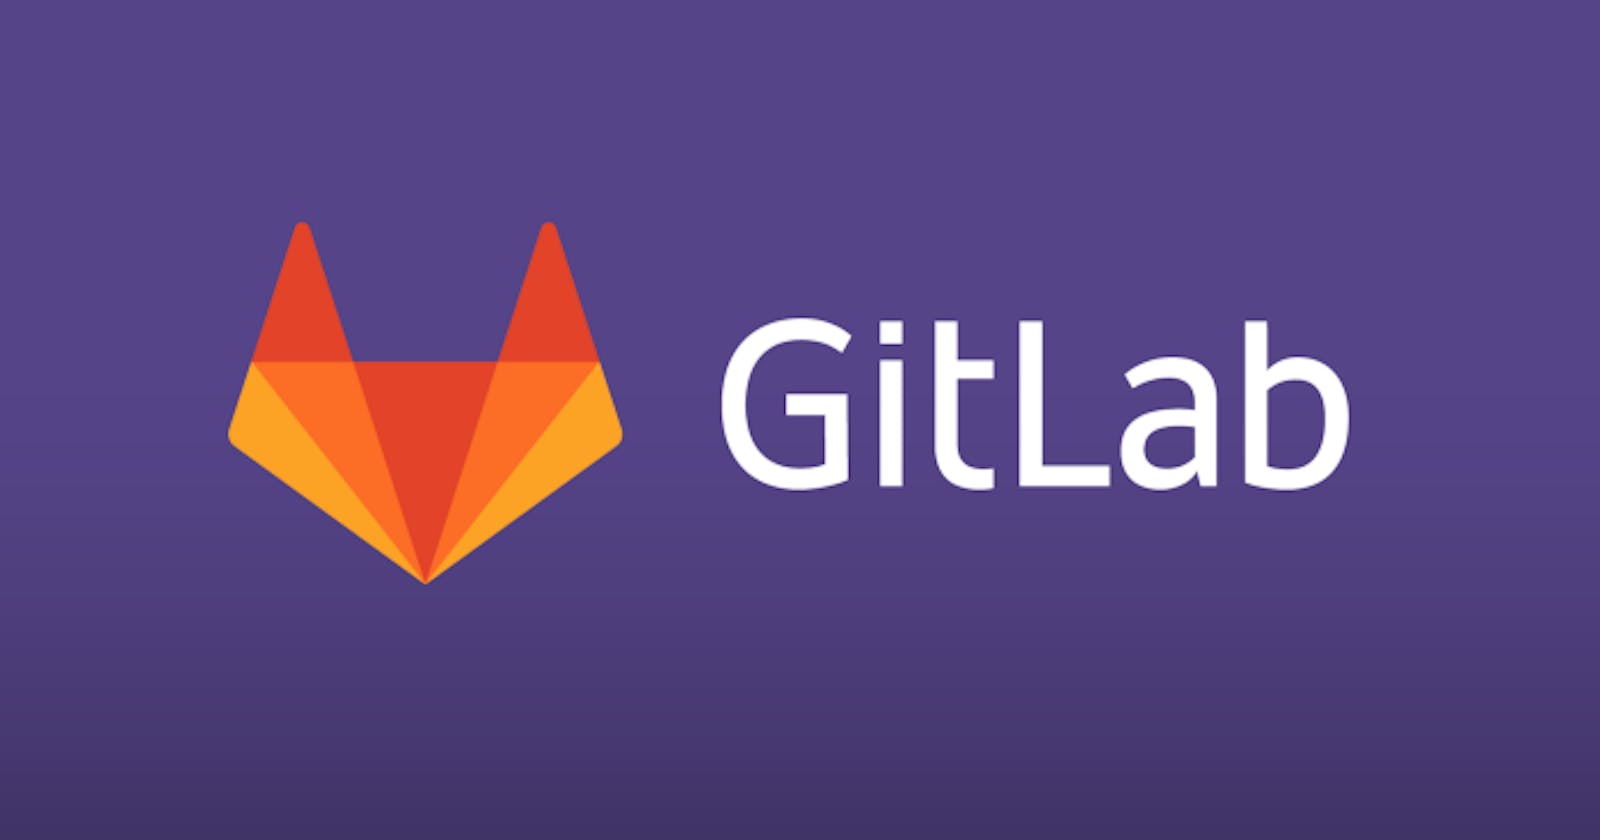 Configure https for gitlab and all gitlab cloning url on apache server